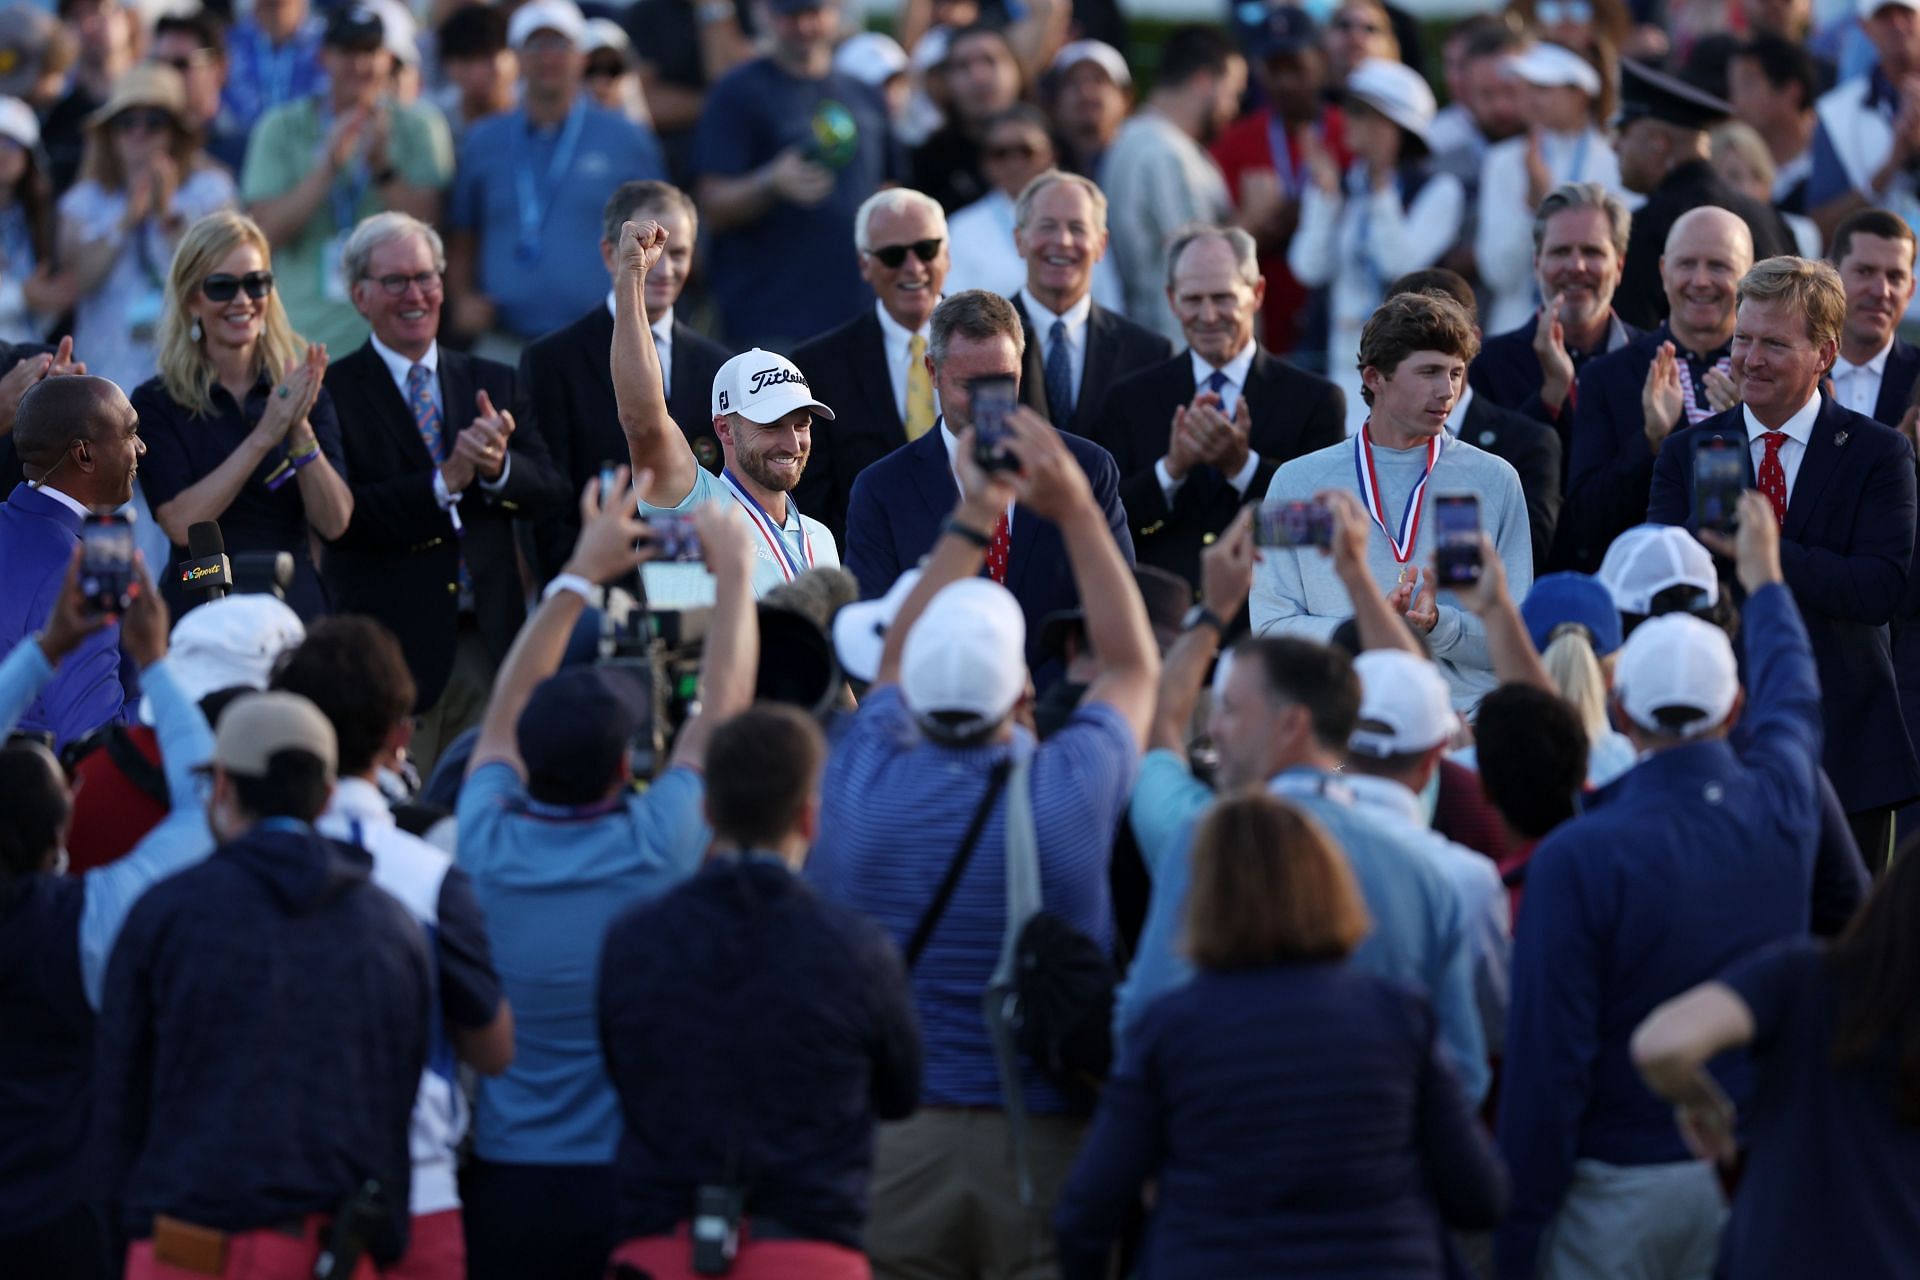 Wyndham Clark reacts after winning the 123rd US Open Championship